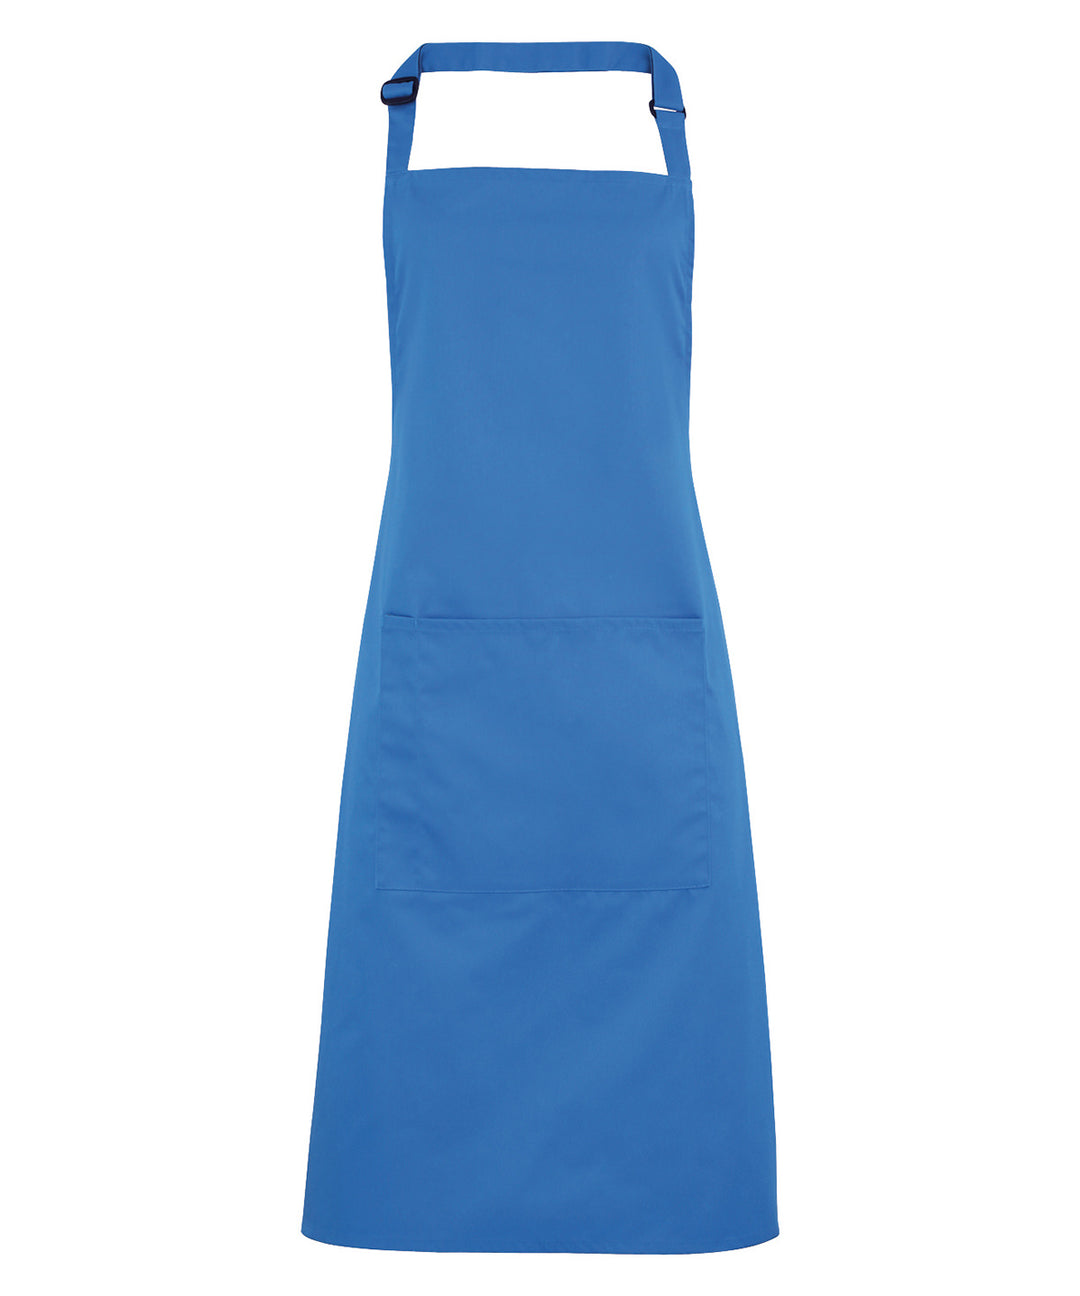 a blue apron on a white background